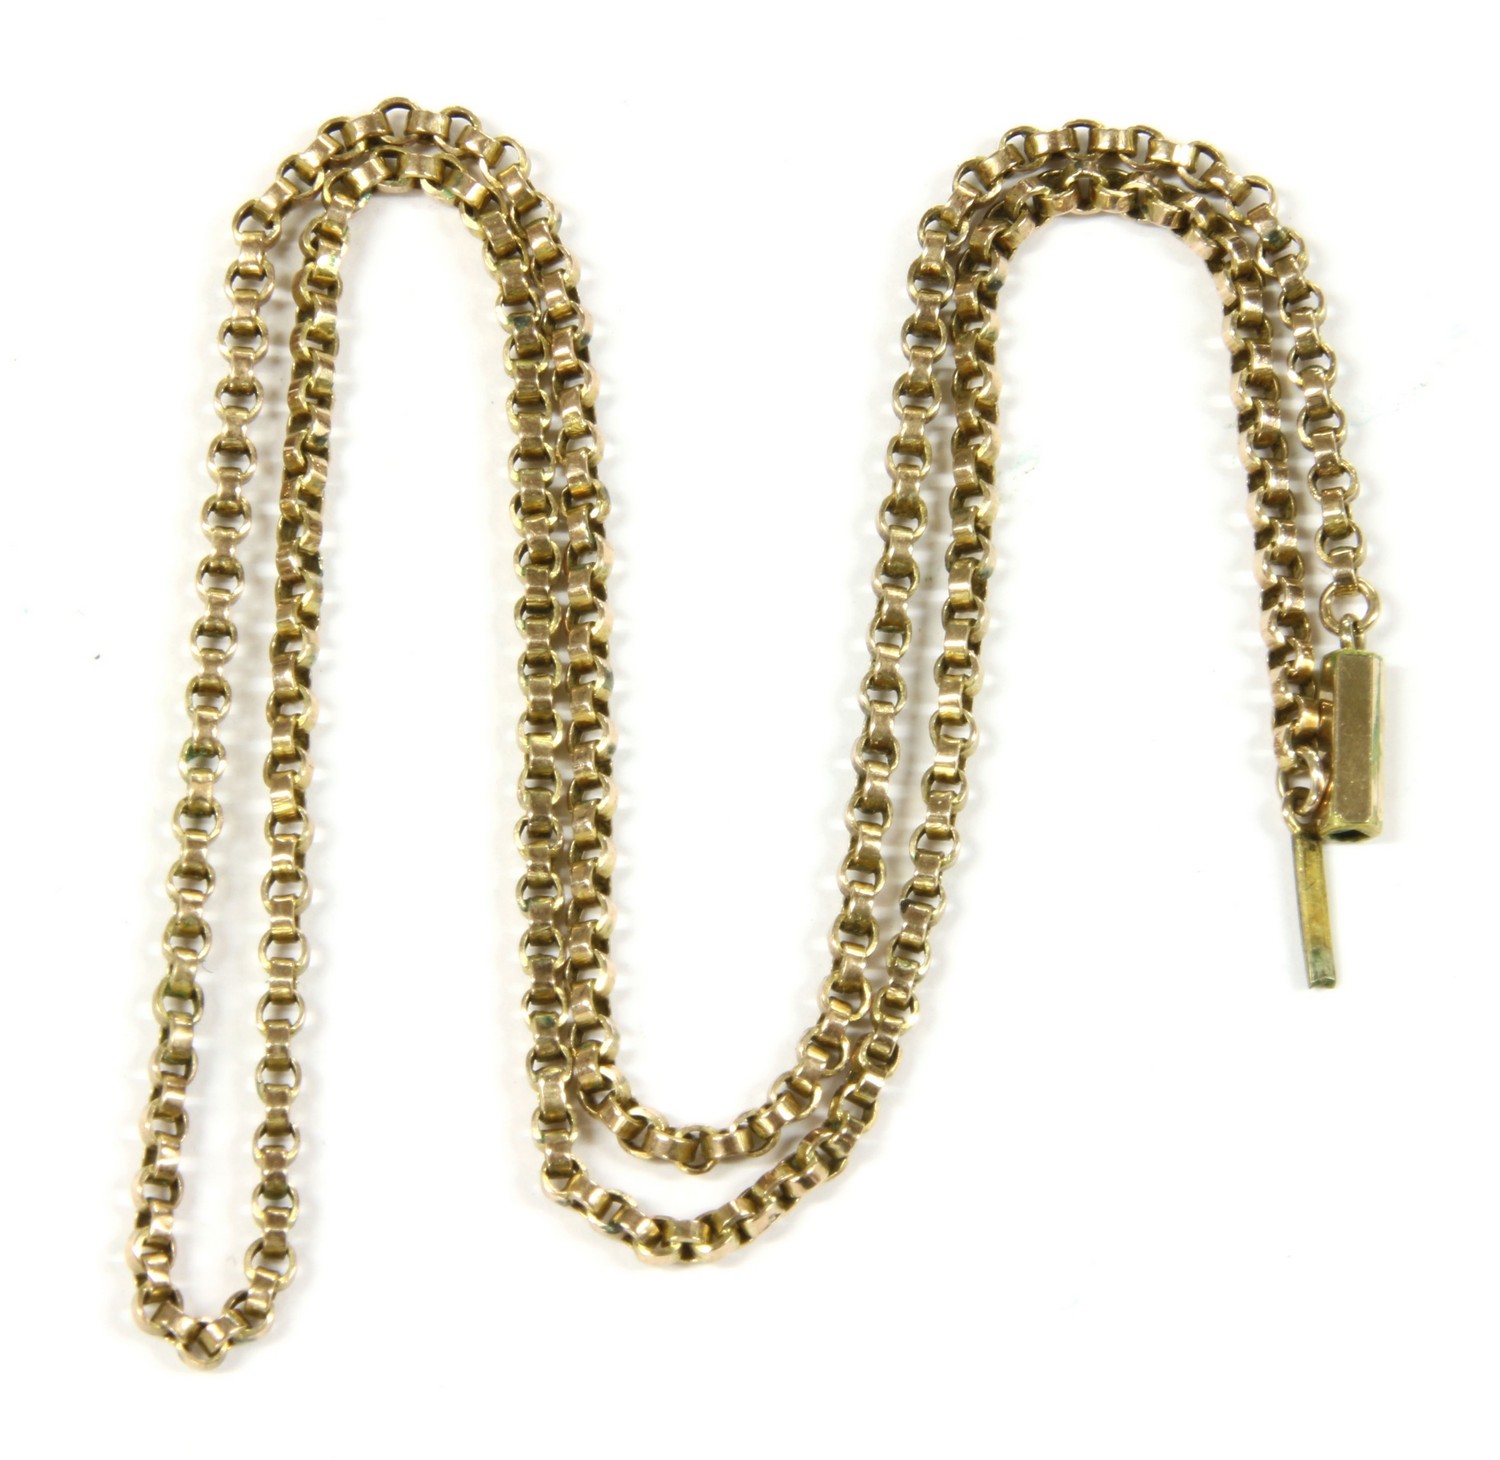 An Italian 18ct gold fine trace link chain